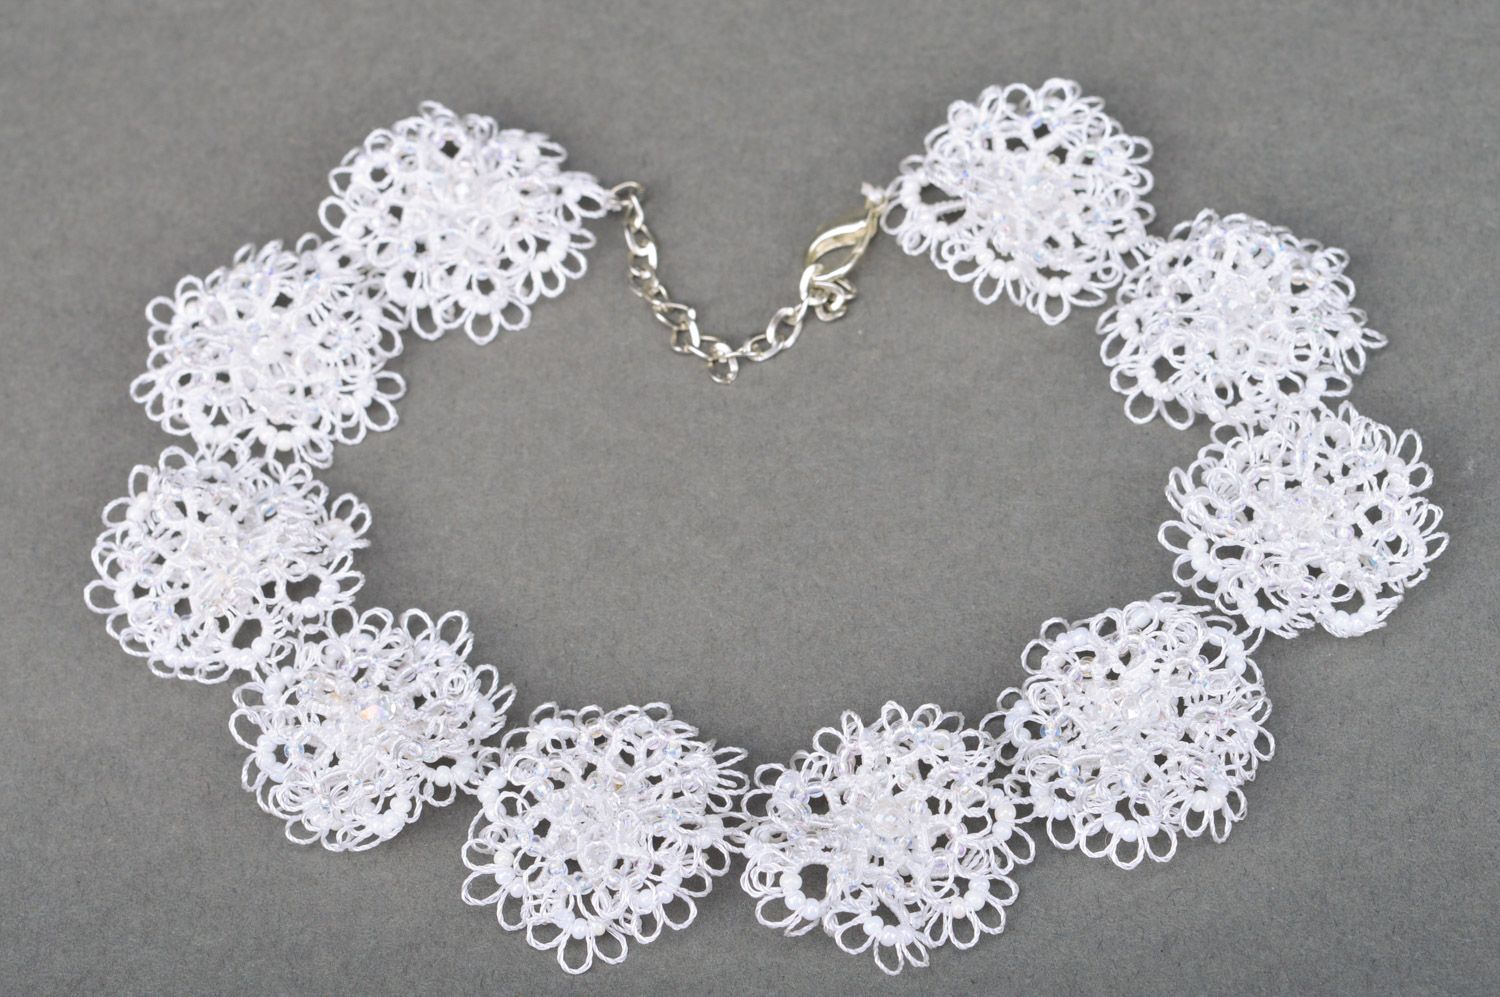 Handmade tatted necklace woven of white satin threads and Czech beads for women photo 4